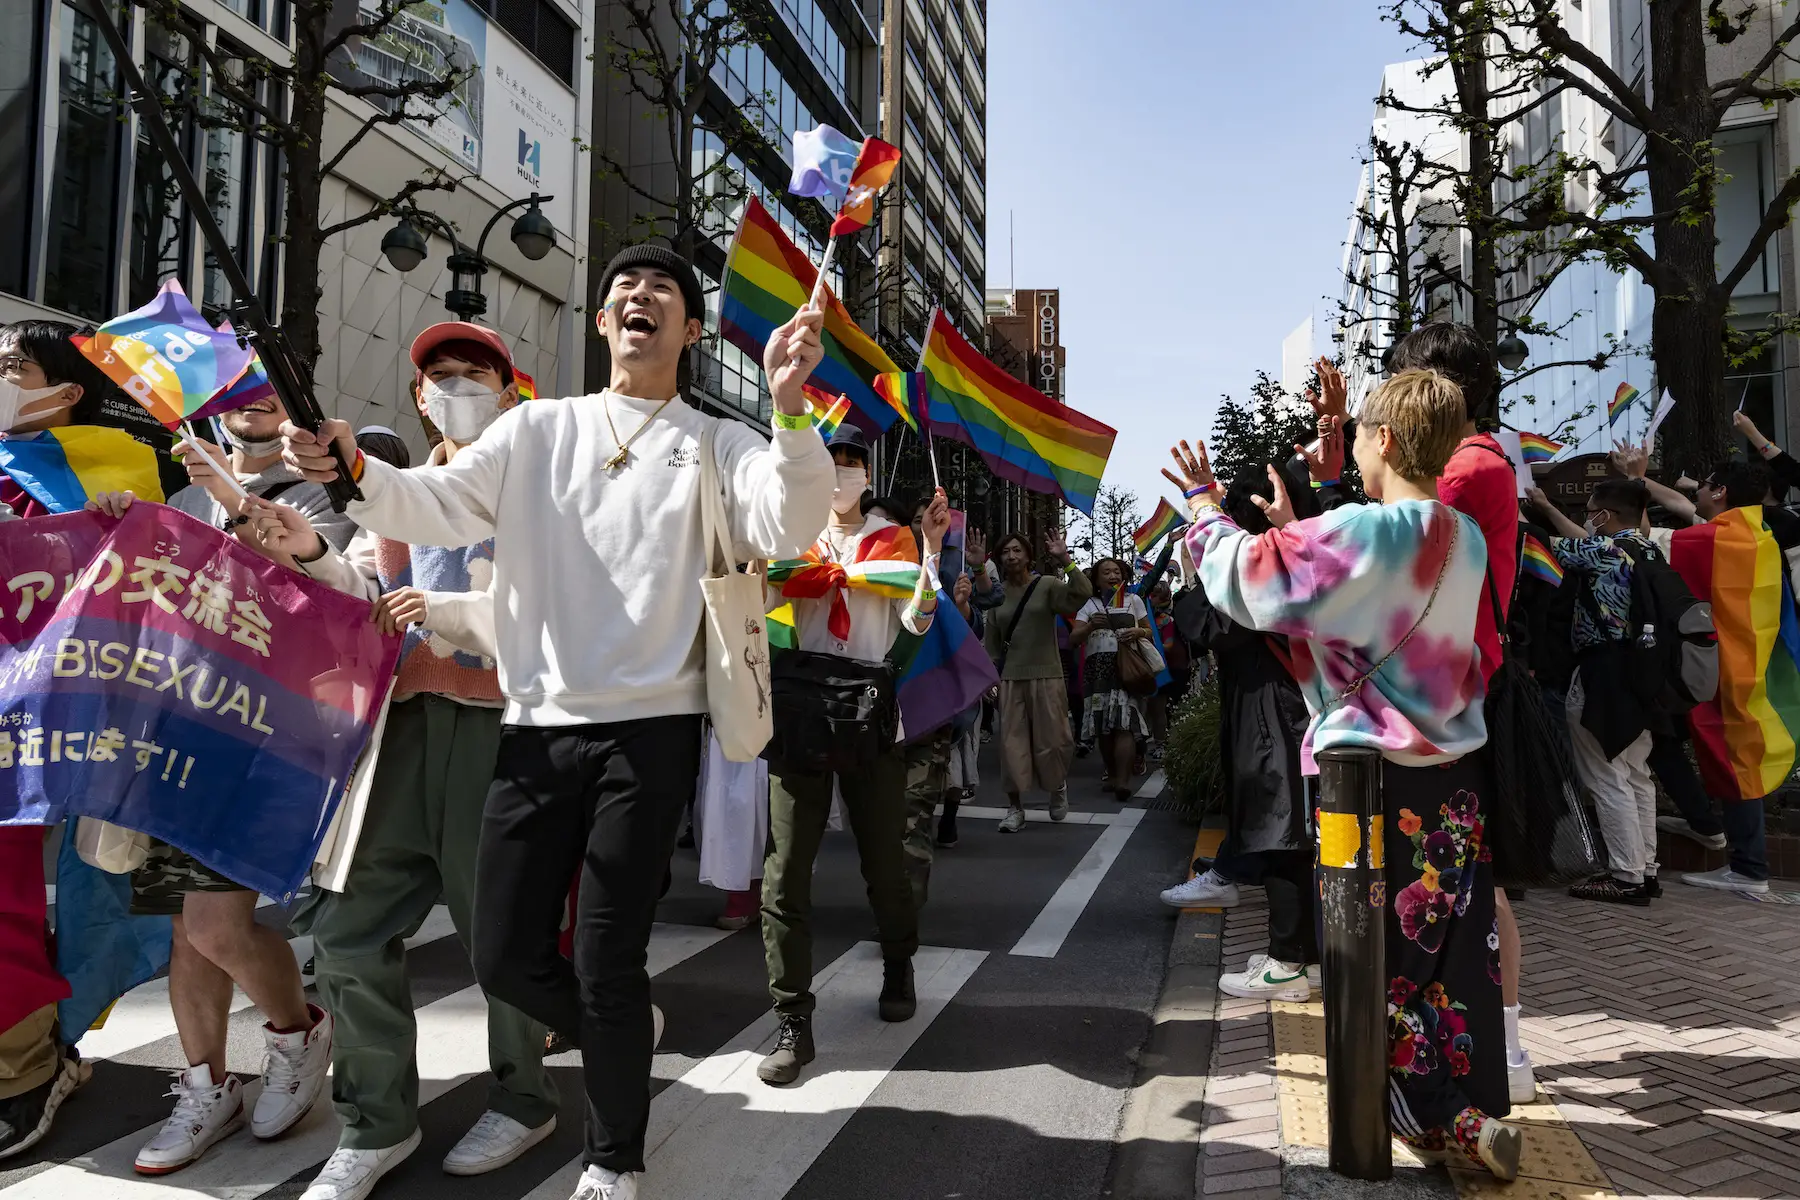 A crowd marches down the street in Tokyo, Japan during Pride 2023; everyone is waving rainbow flags and some wearing medical face masks